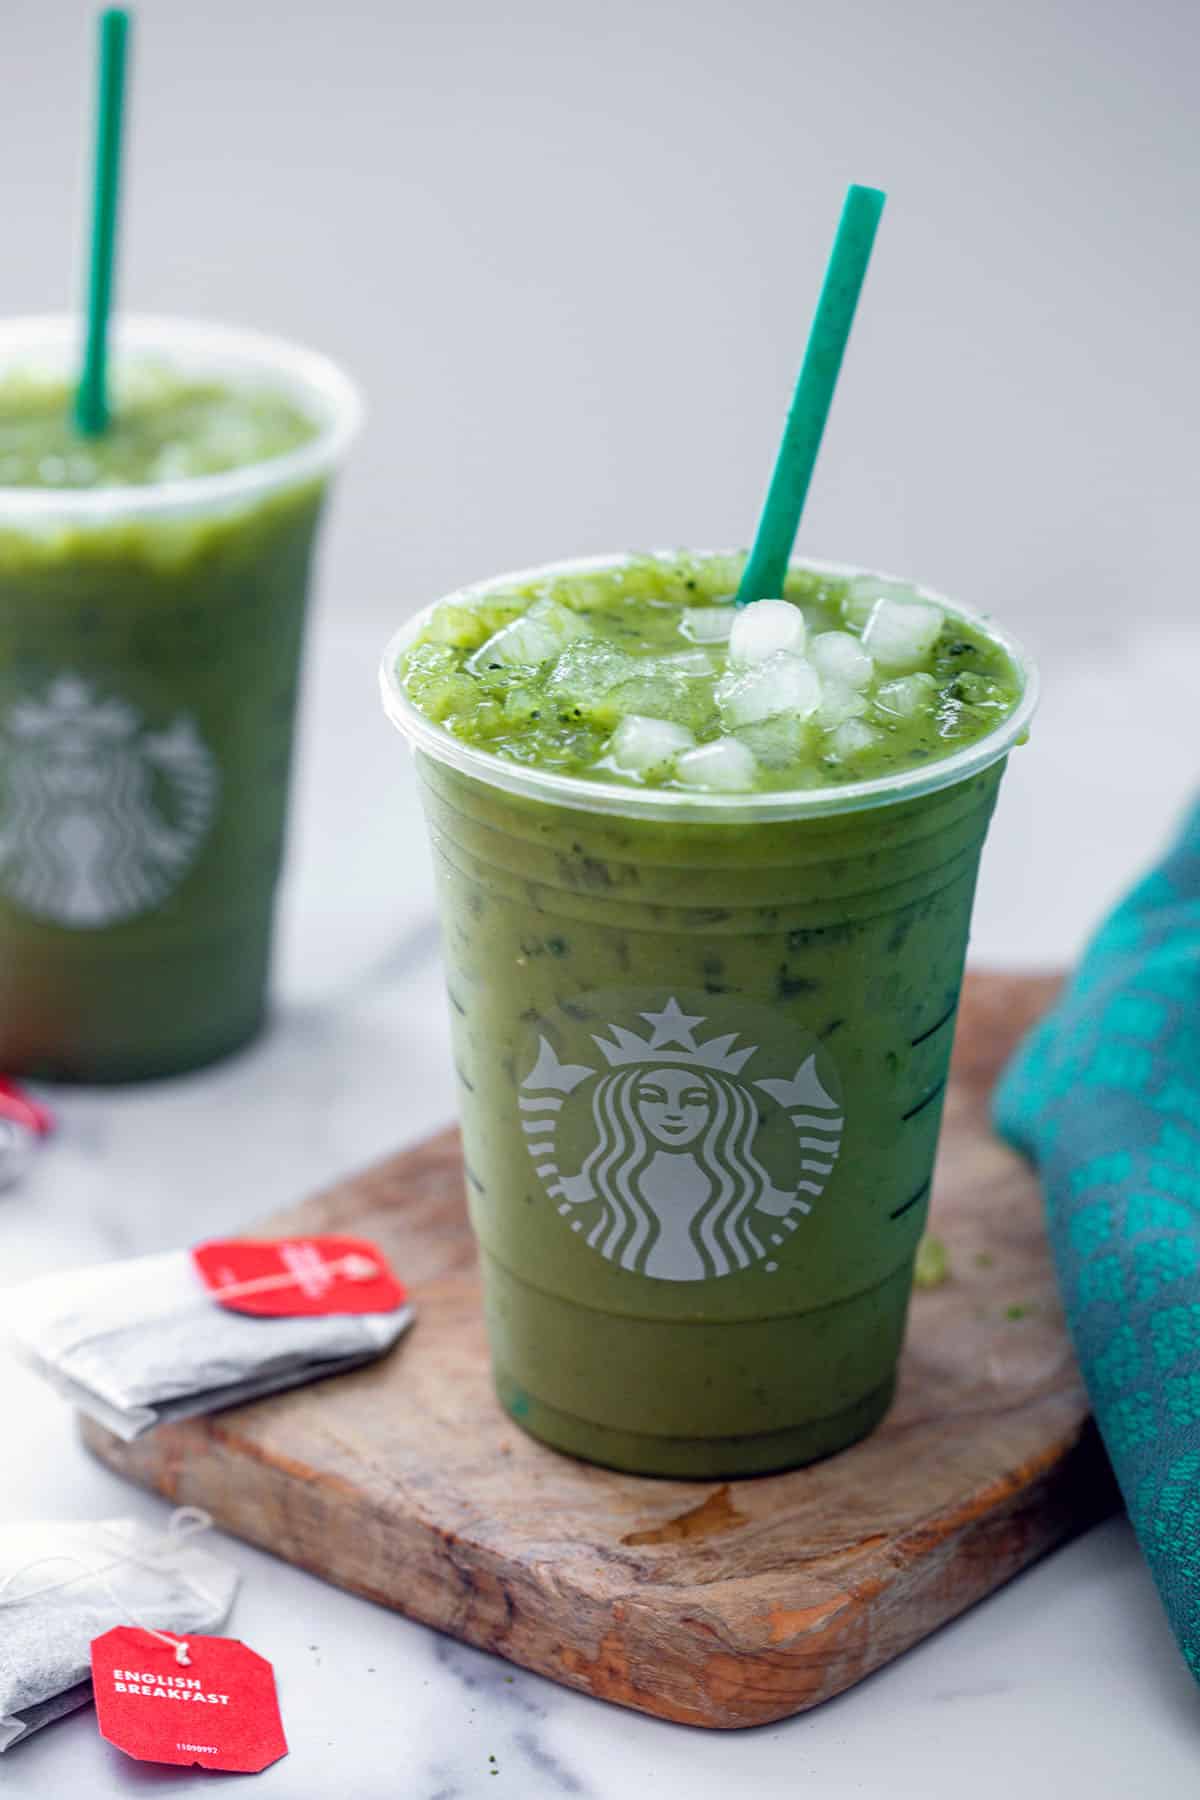 Overhead view of two Starbucks Green Drinks with green straws and black tea bags in background.